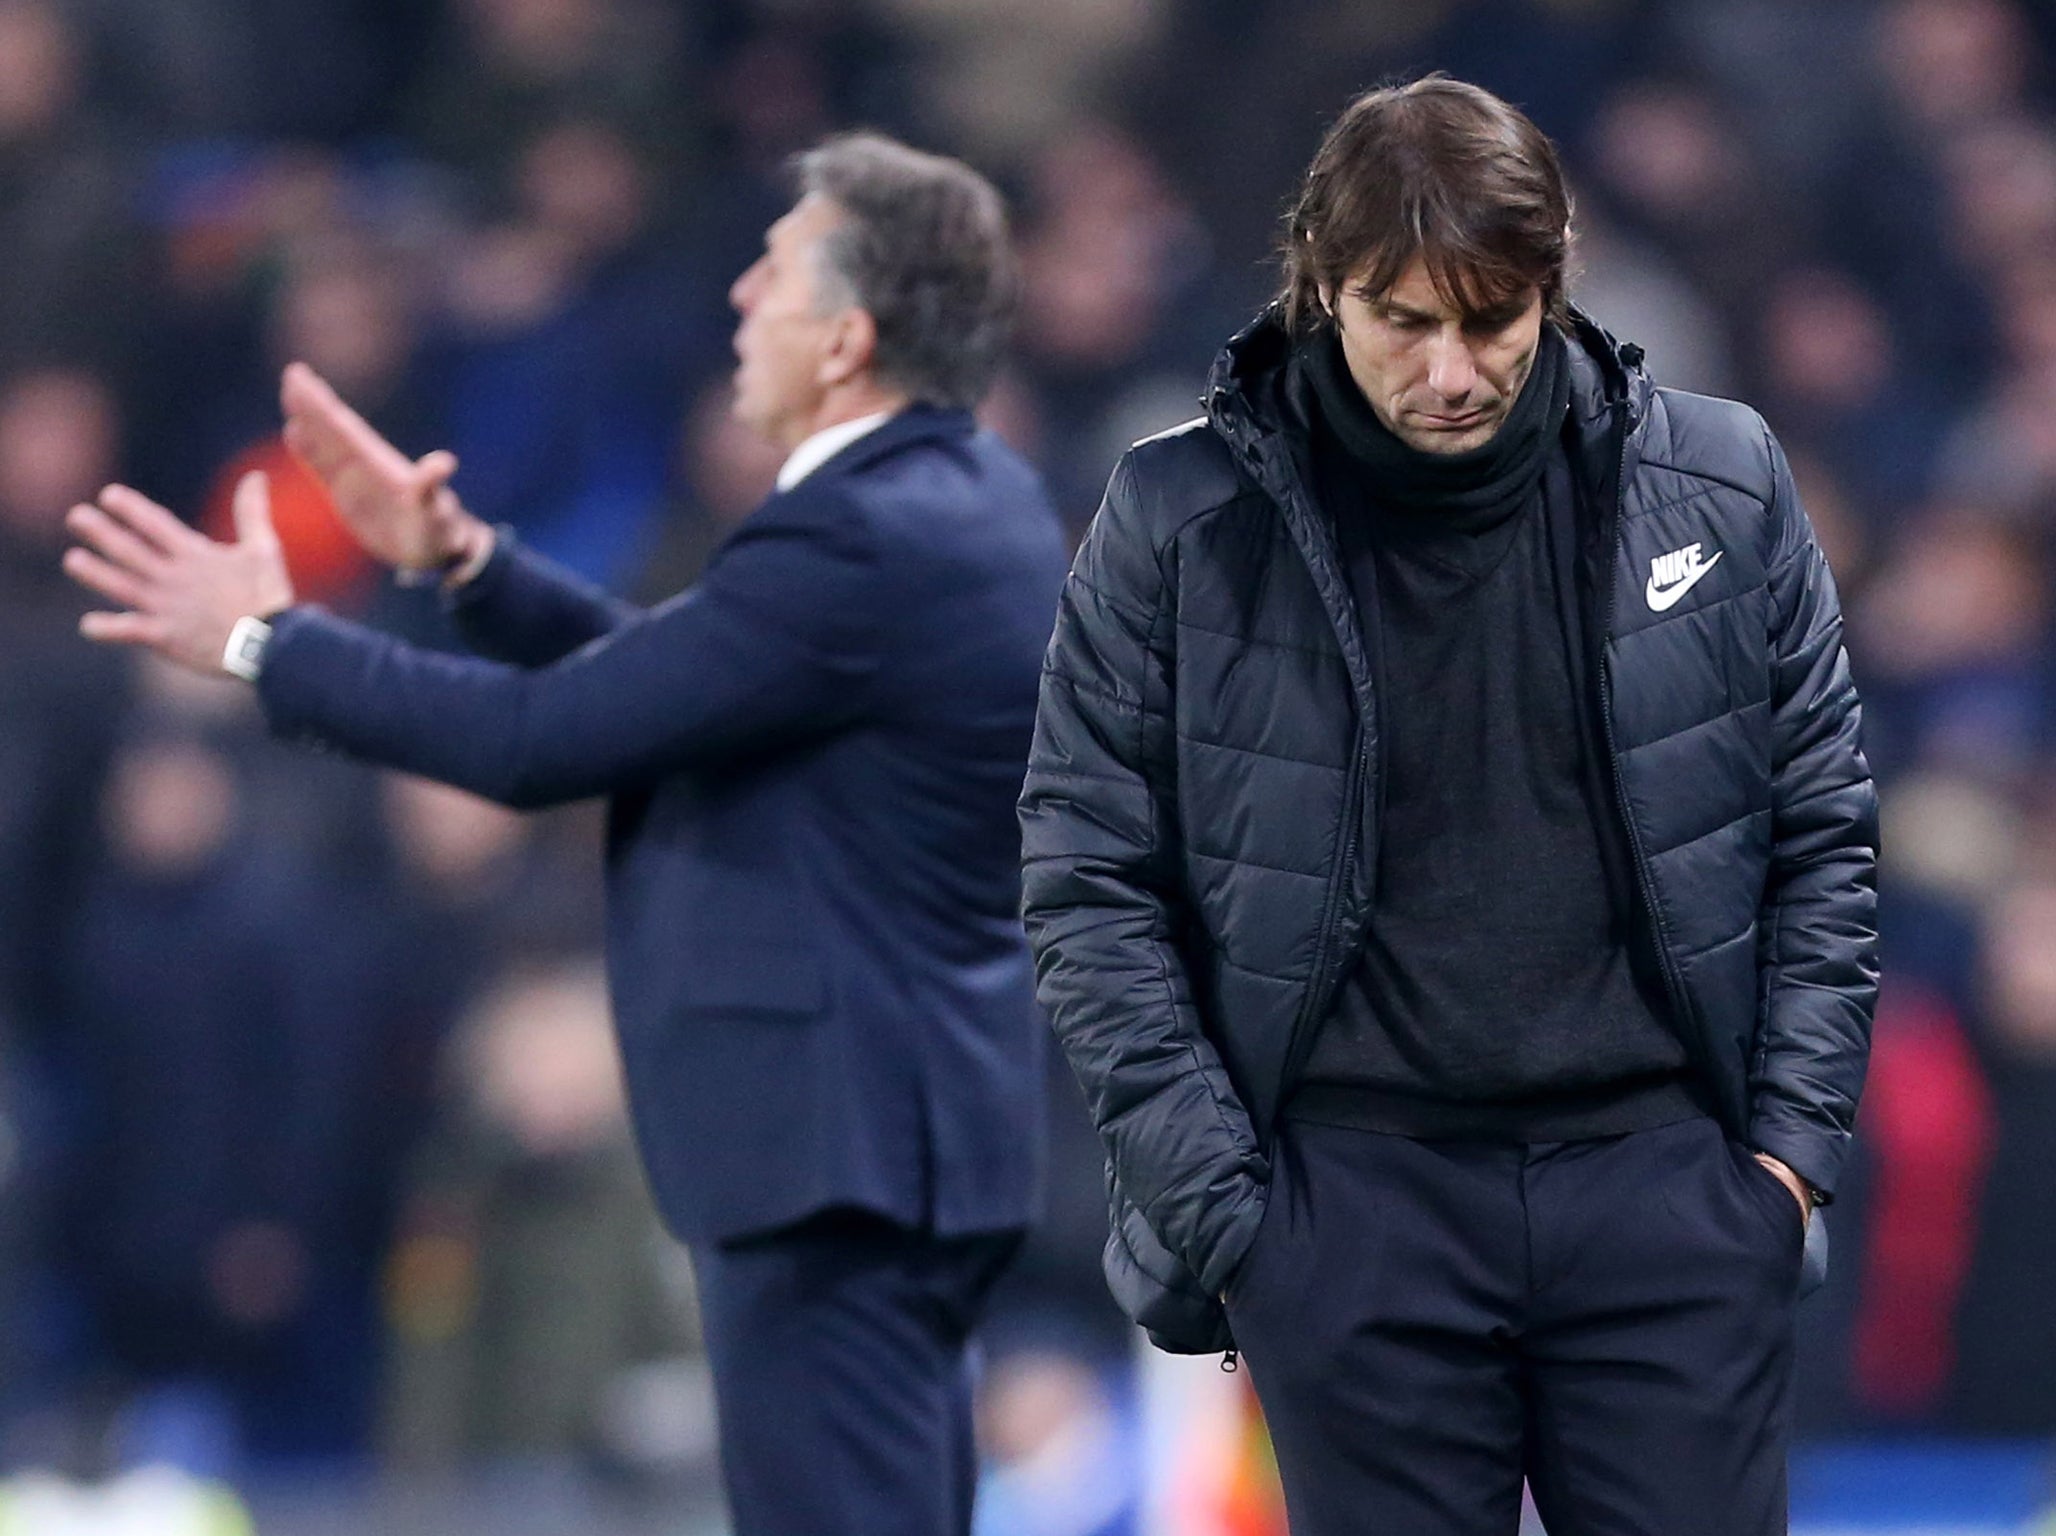 Antonio Conte has admitted the club’s summer recruitment failed to meet his demands